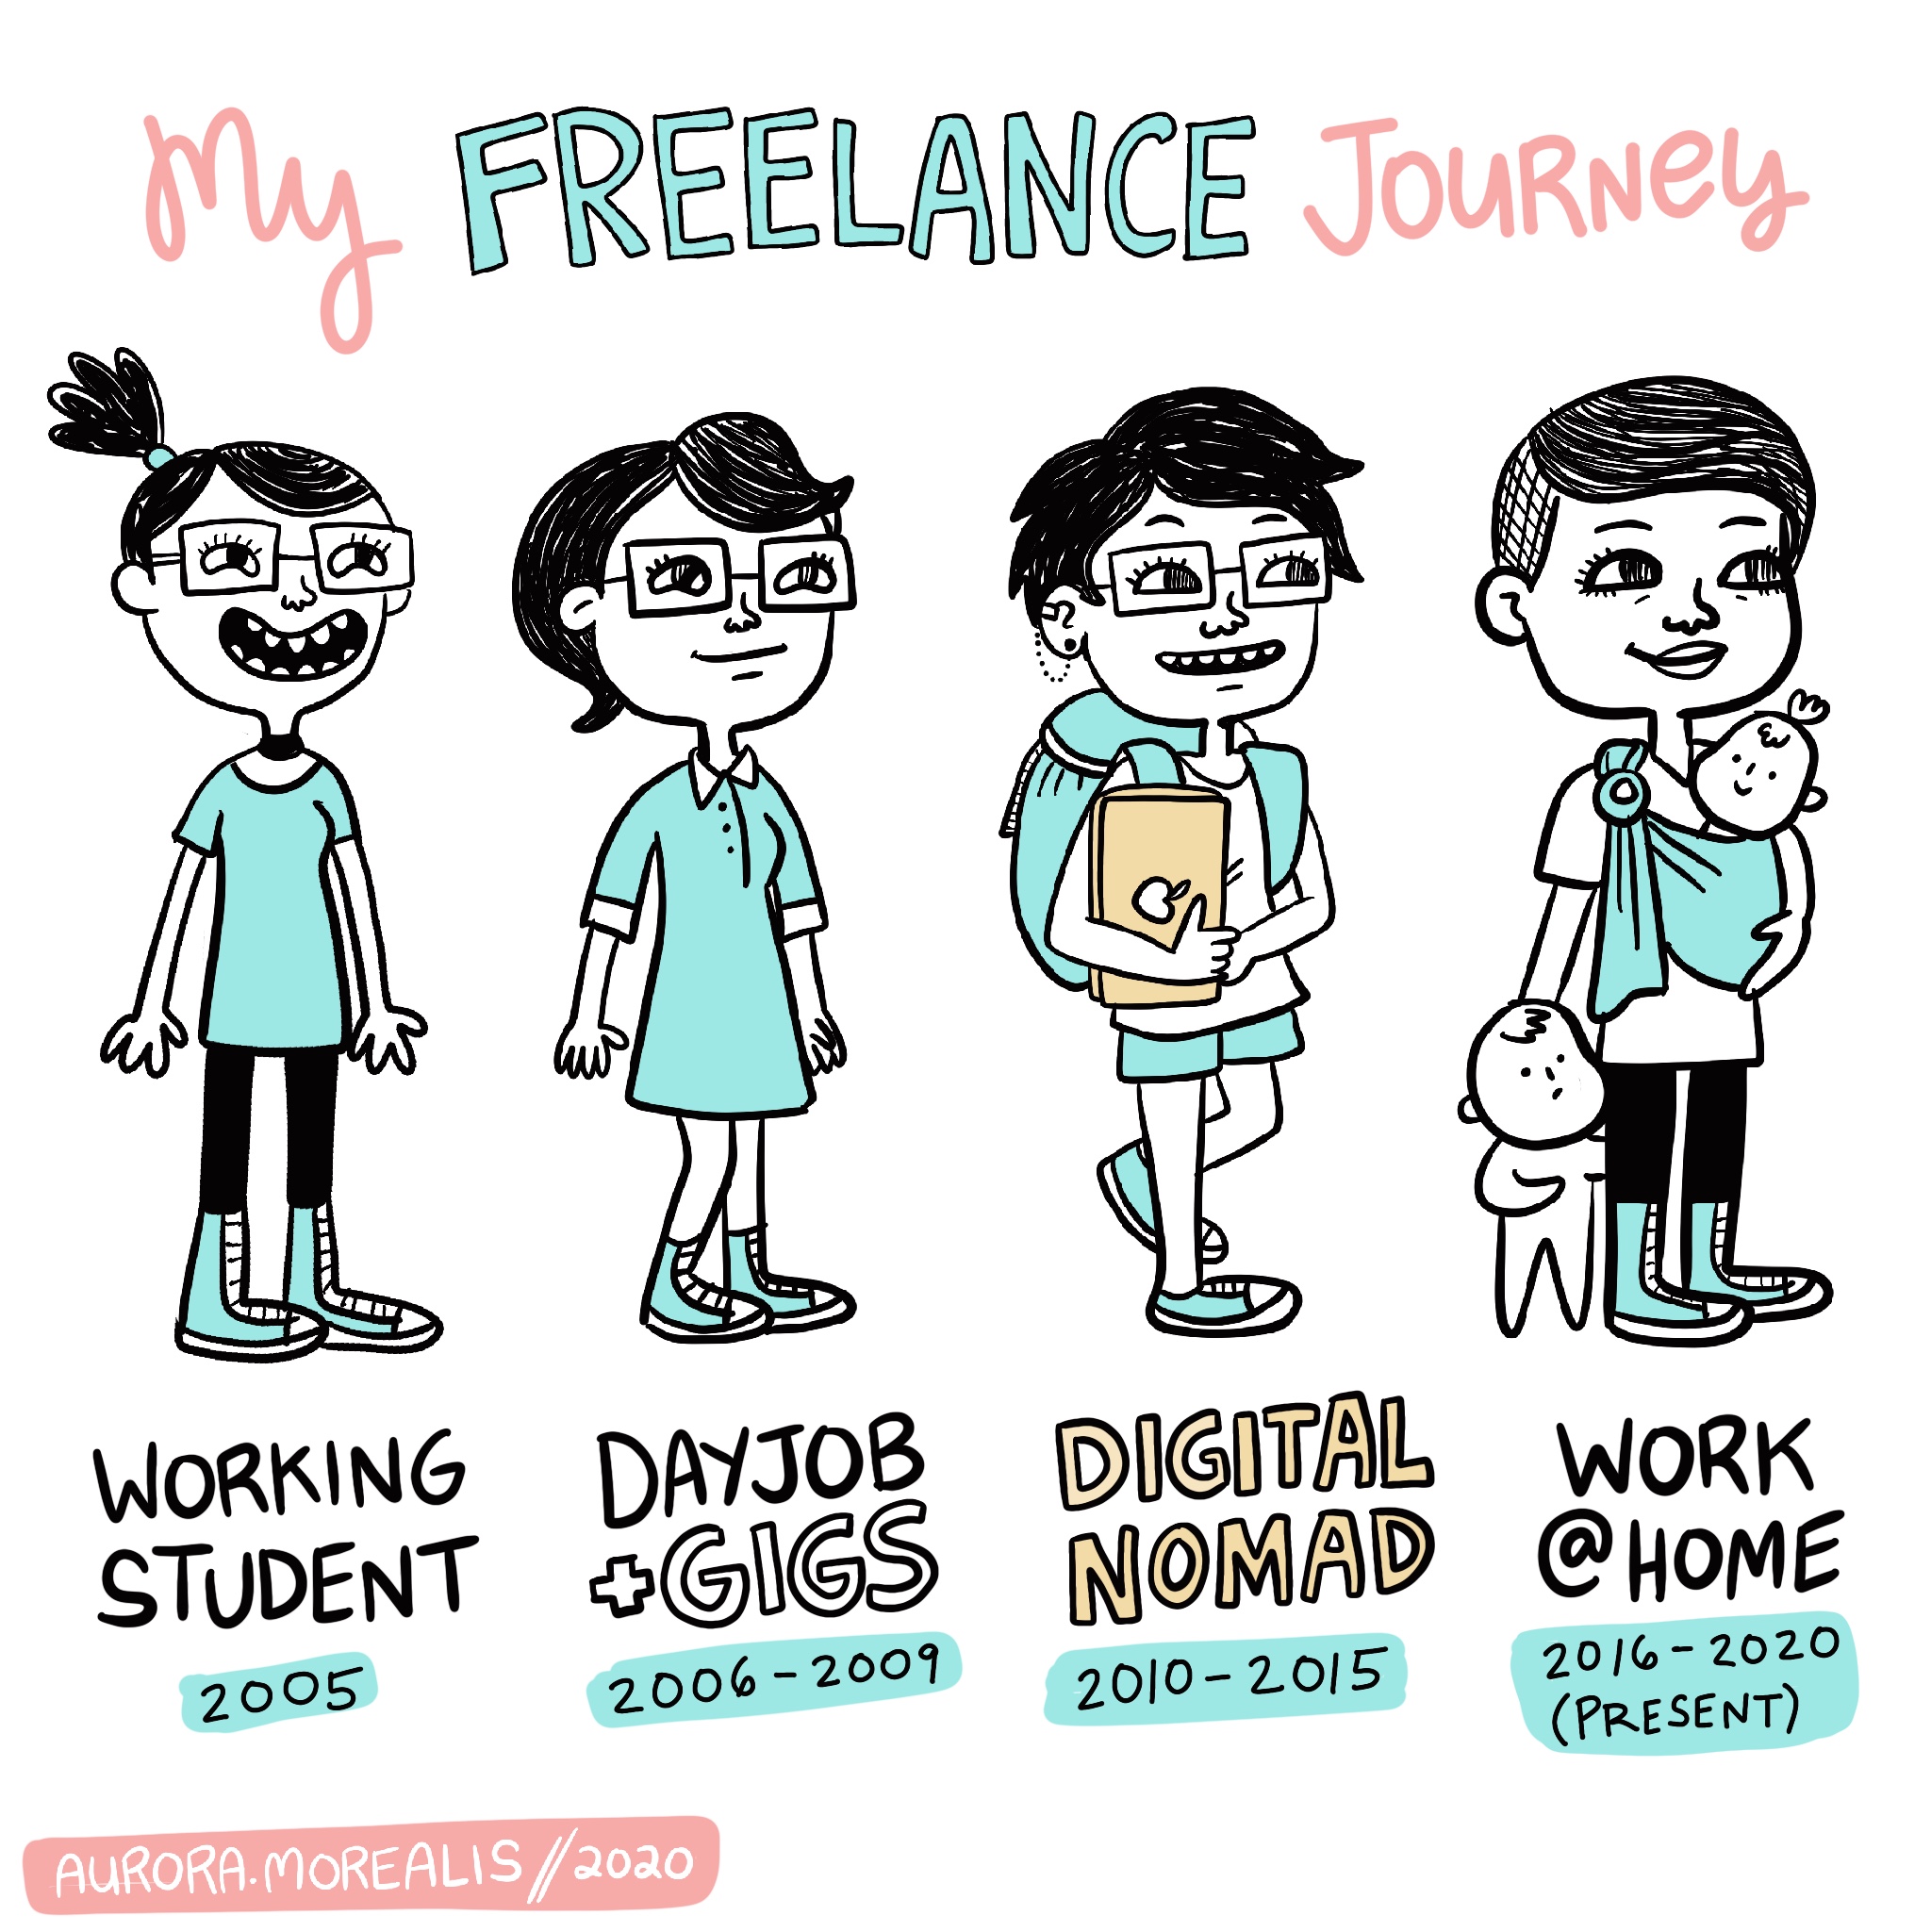 My Freelance Journey: from working student, to employee moonlighting with sideline gigs, to digital nomad, to work at home mom